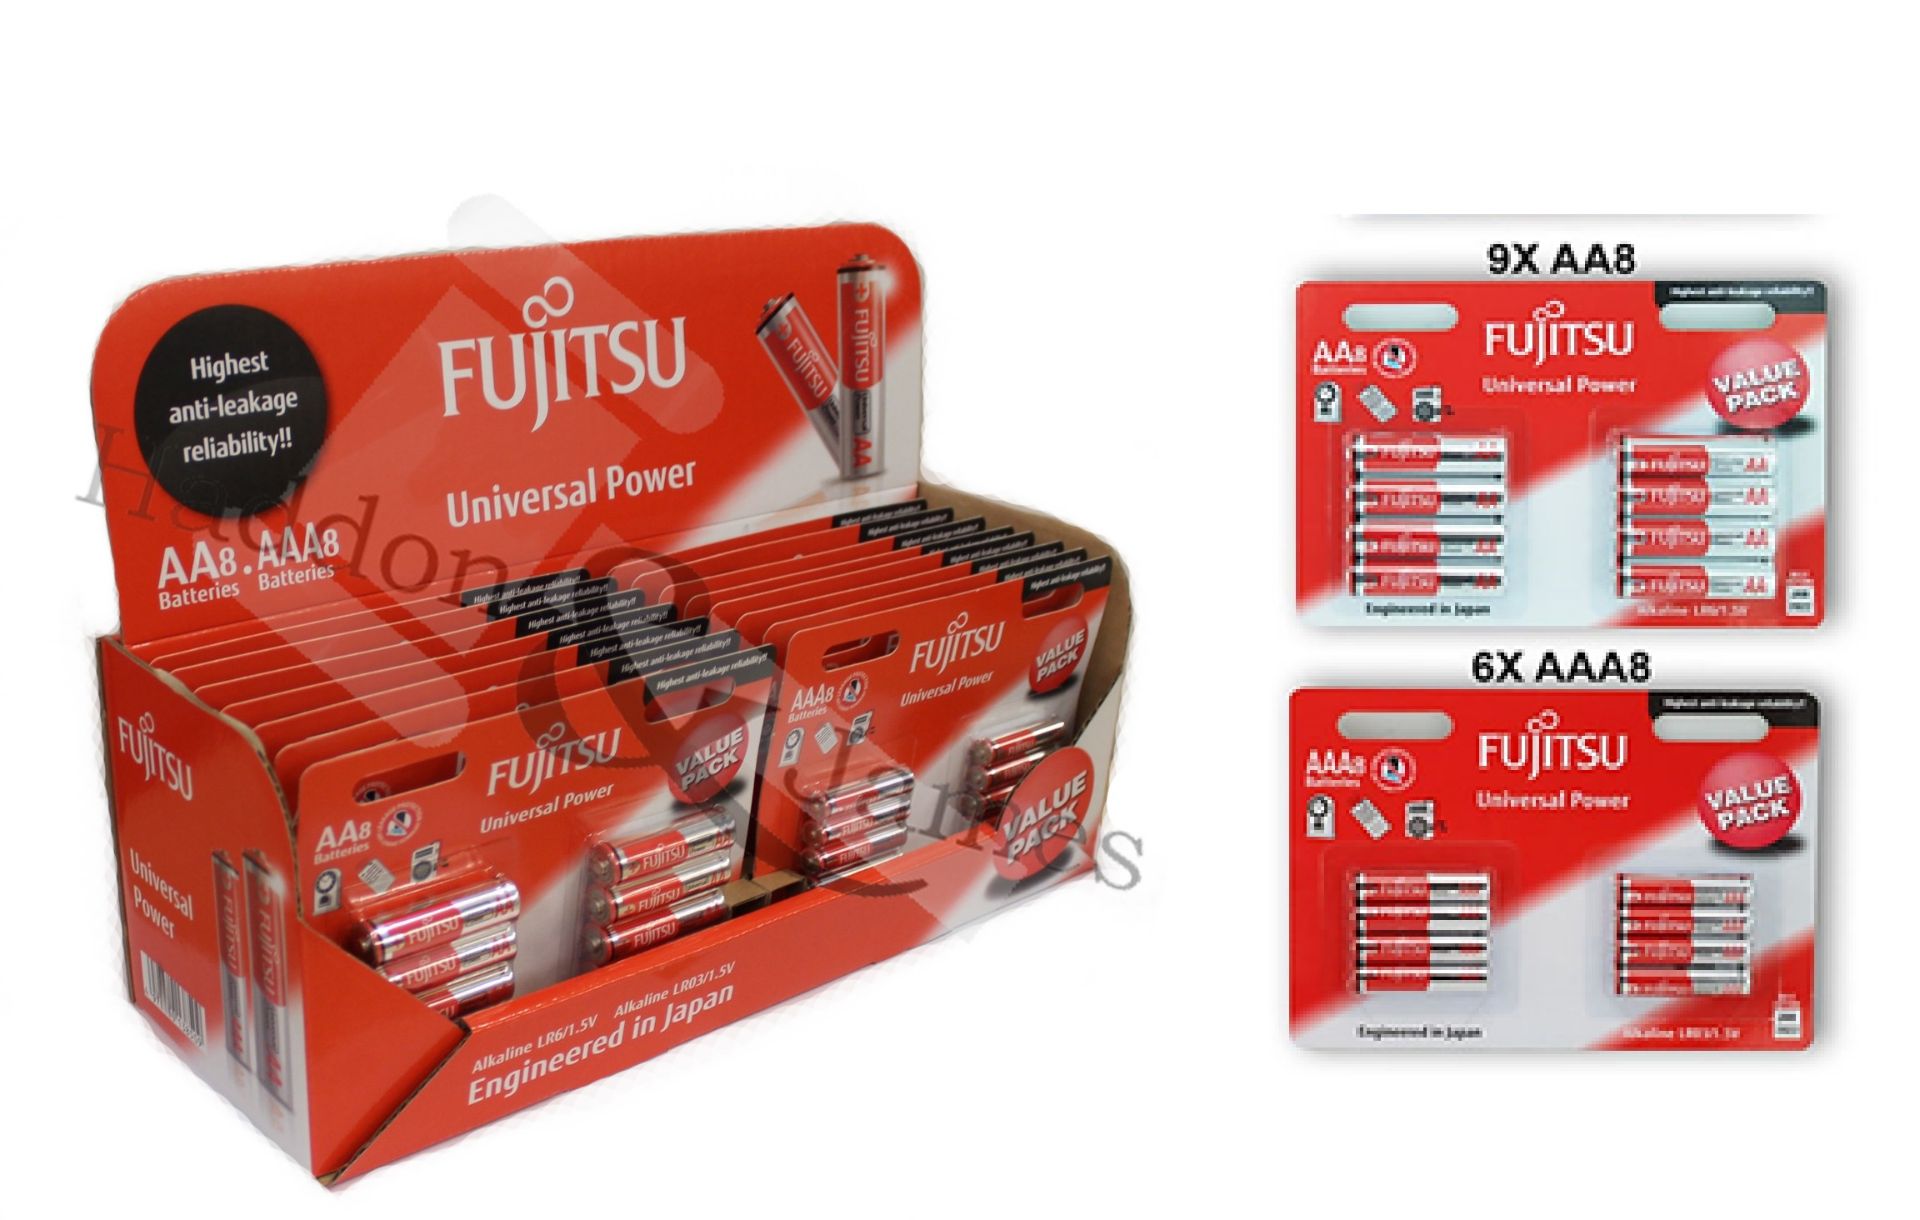 V Brand New Fujistu Universal Power Assorted Pack of Alkaline Batteries (Contains 8 x 8 Pack AAA and